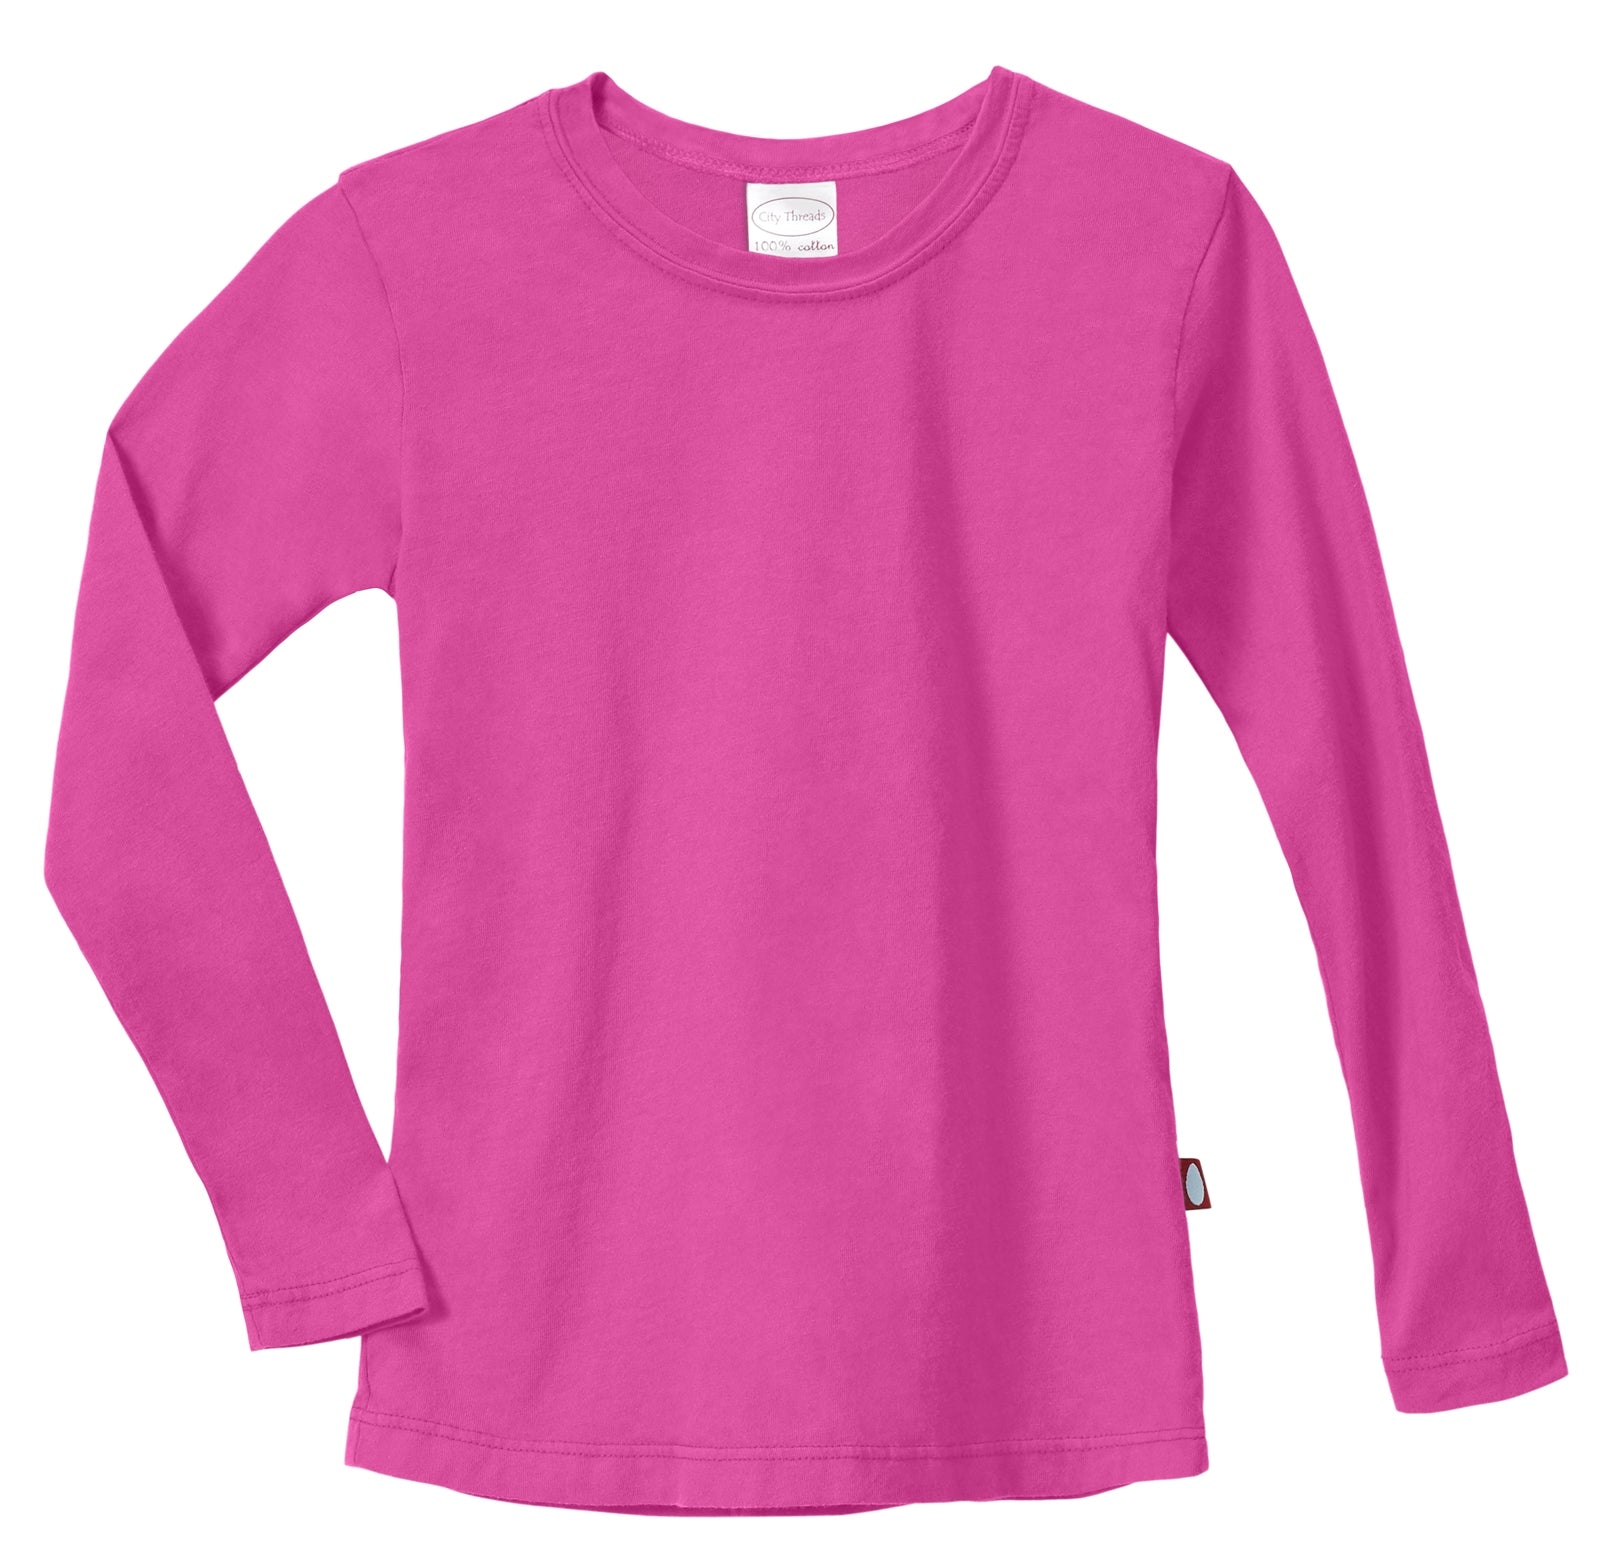 Girls Soft Jersey Long Sleeve Tee | Hot Pink - Super Comfy Kids Clothing, Softest Cotton Fabric, Sensory Friendly, USA Made - City Threads, Hot Pink /